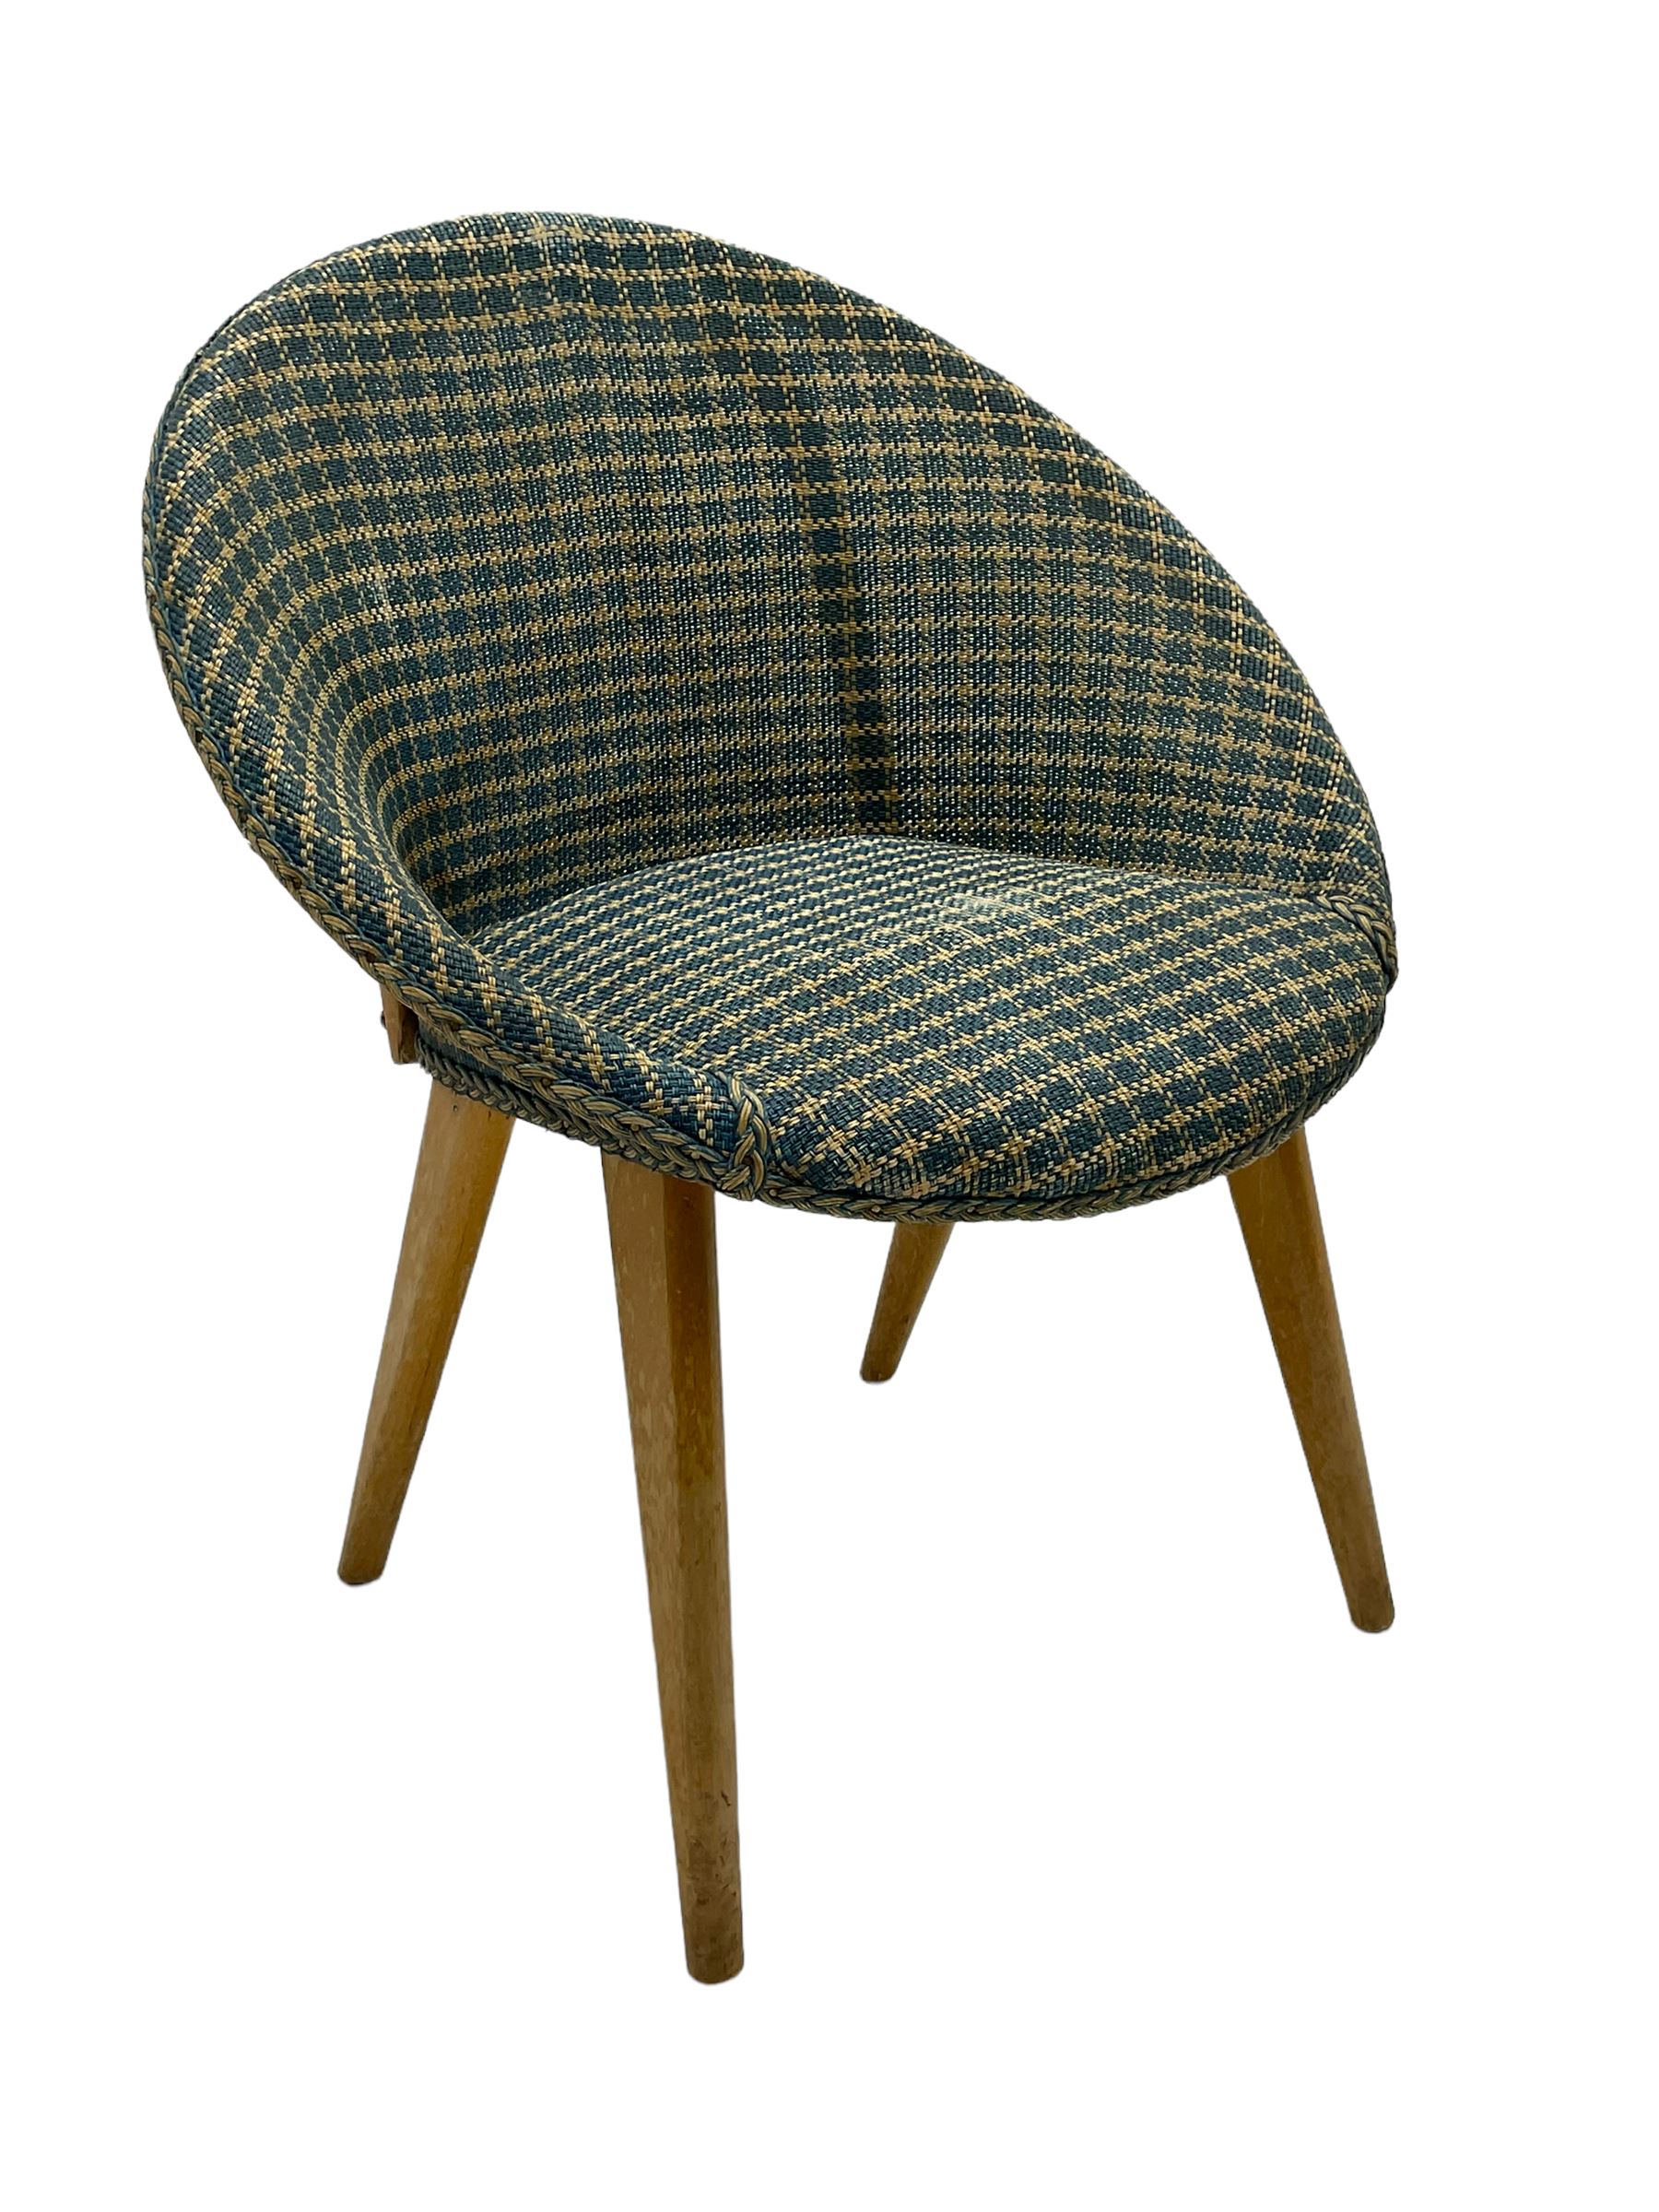 Mid-20th century satellite basket chair - Image 2 of 3